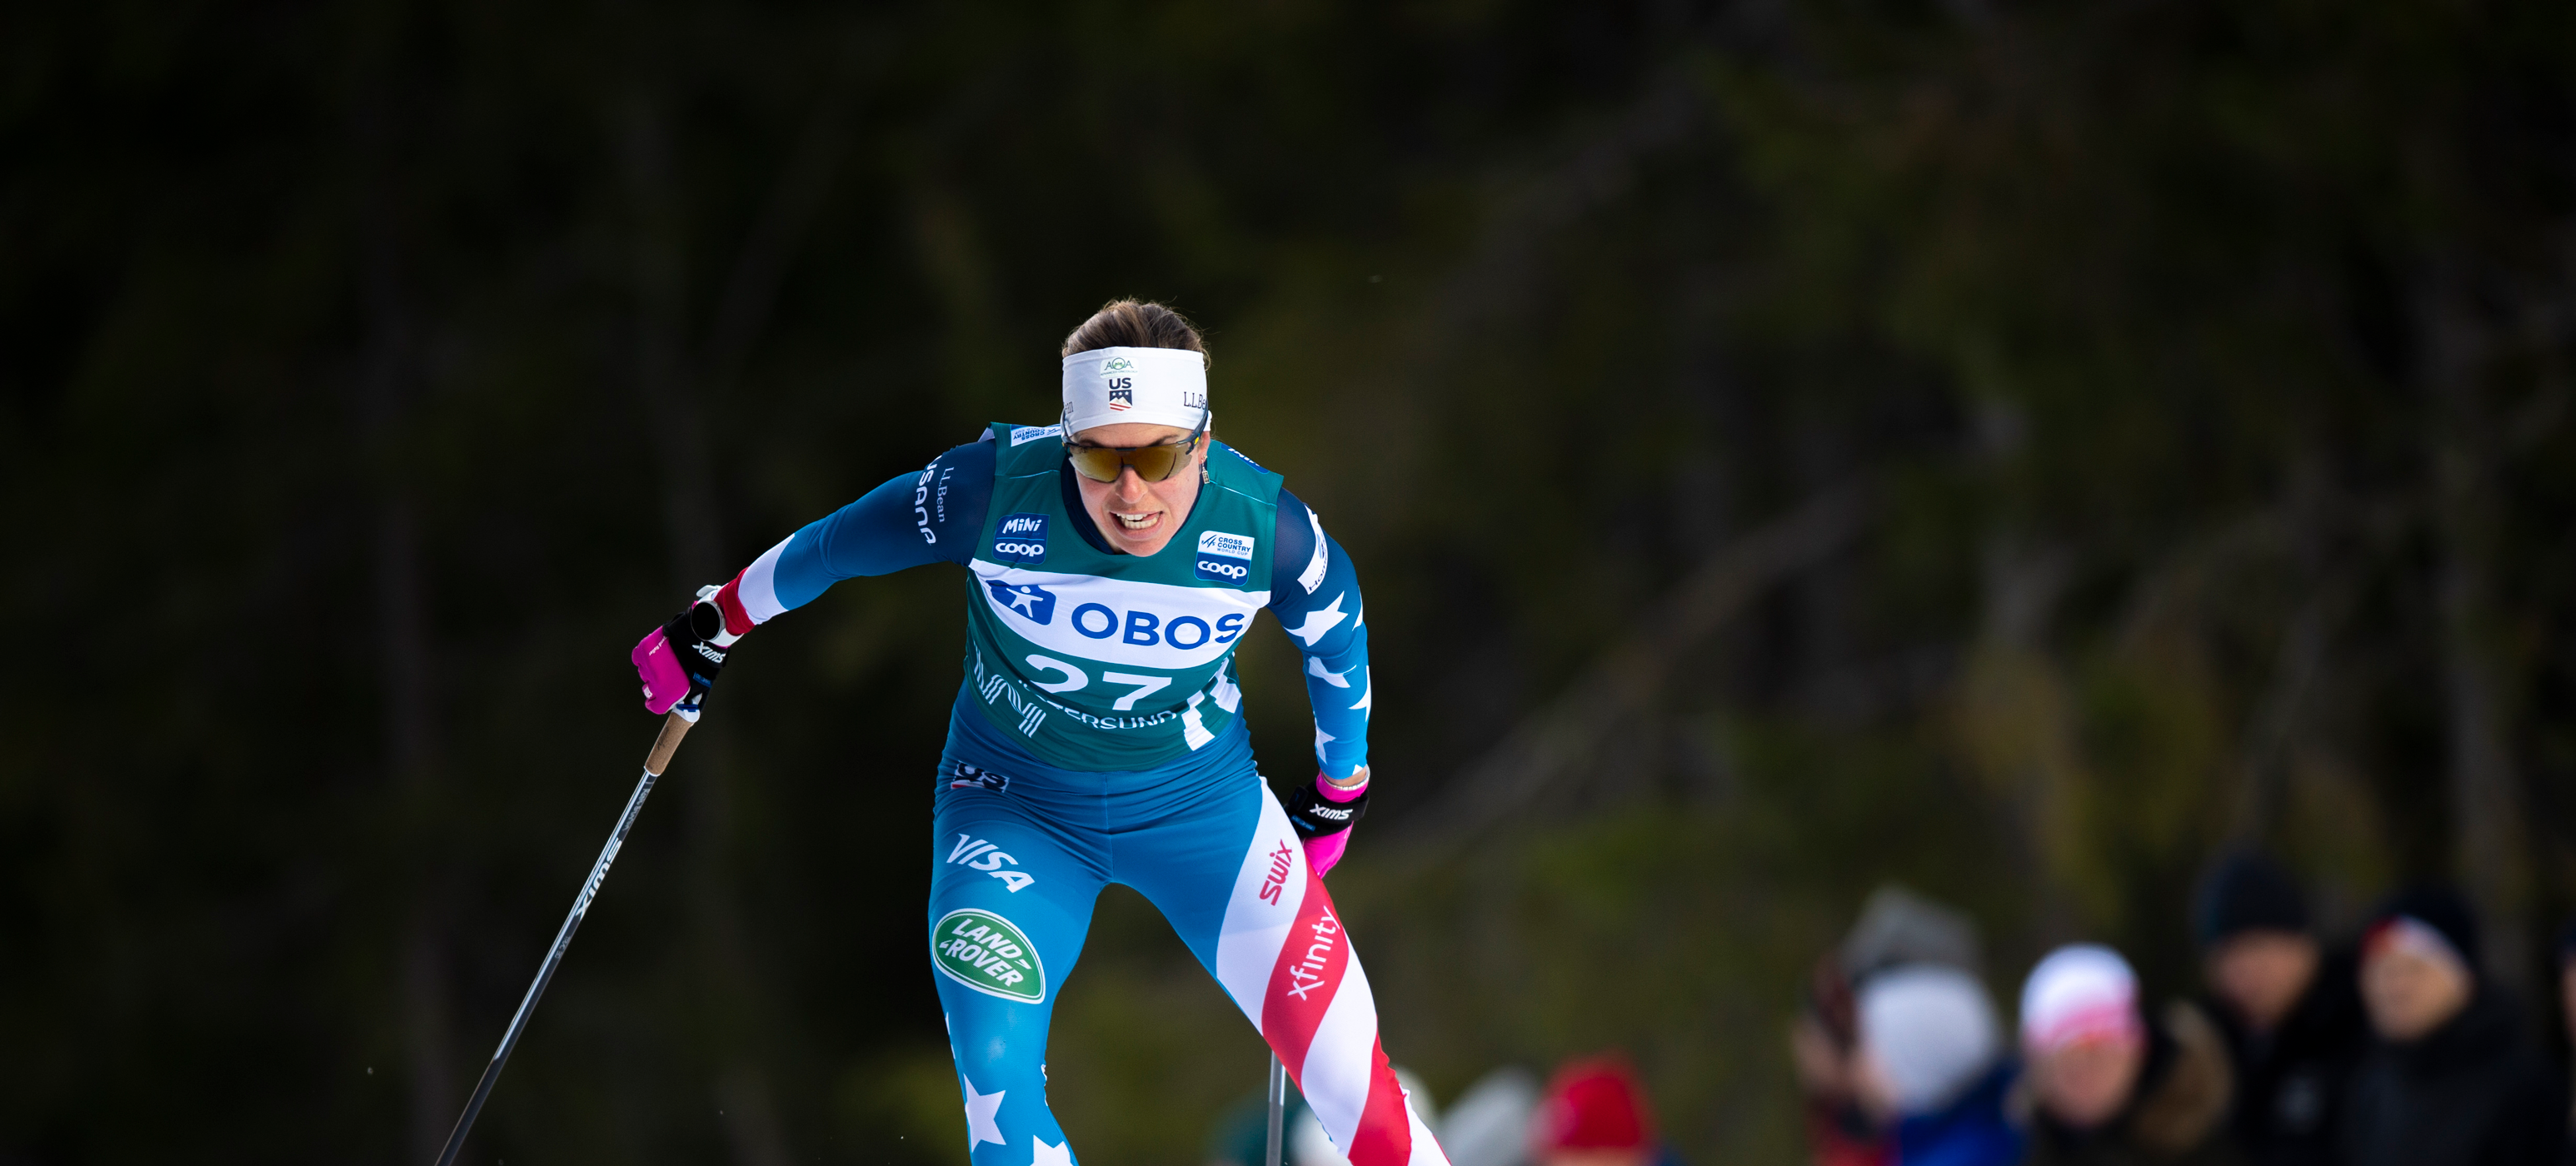 Rosie Brennan opened the nine-day Ski Tour 2020 with a ninth-place finish Saturday. (www.nordicfocus.com. © Vianney THIBAUT/NordicFocus)